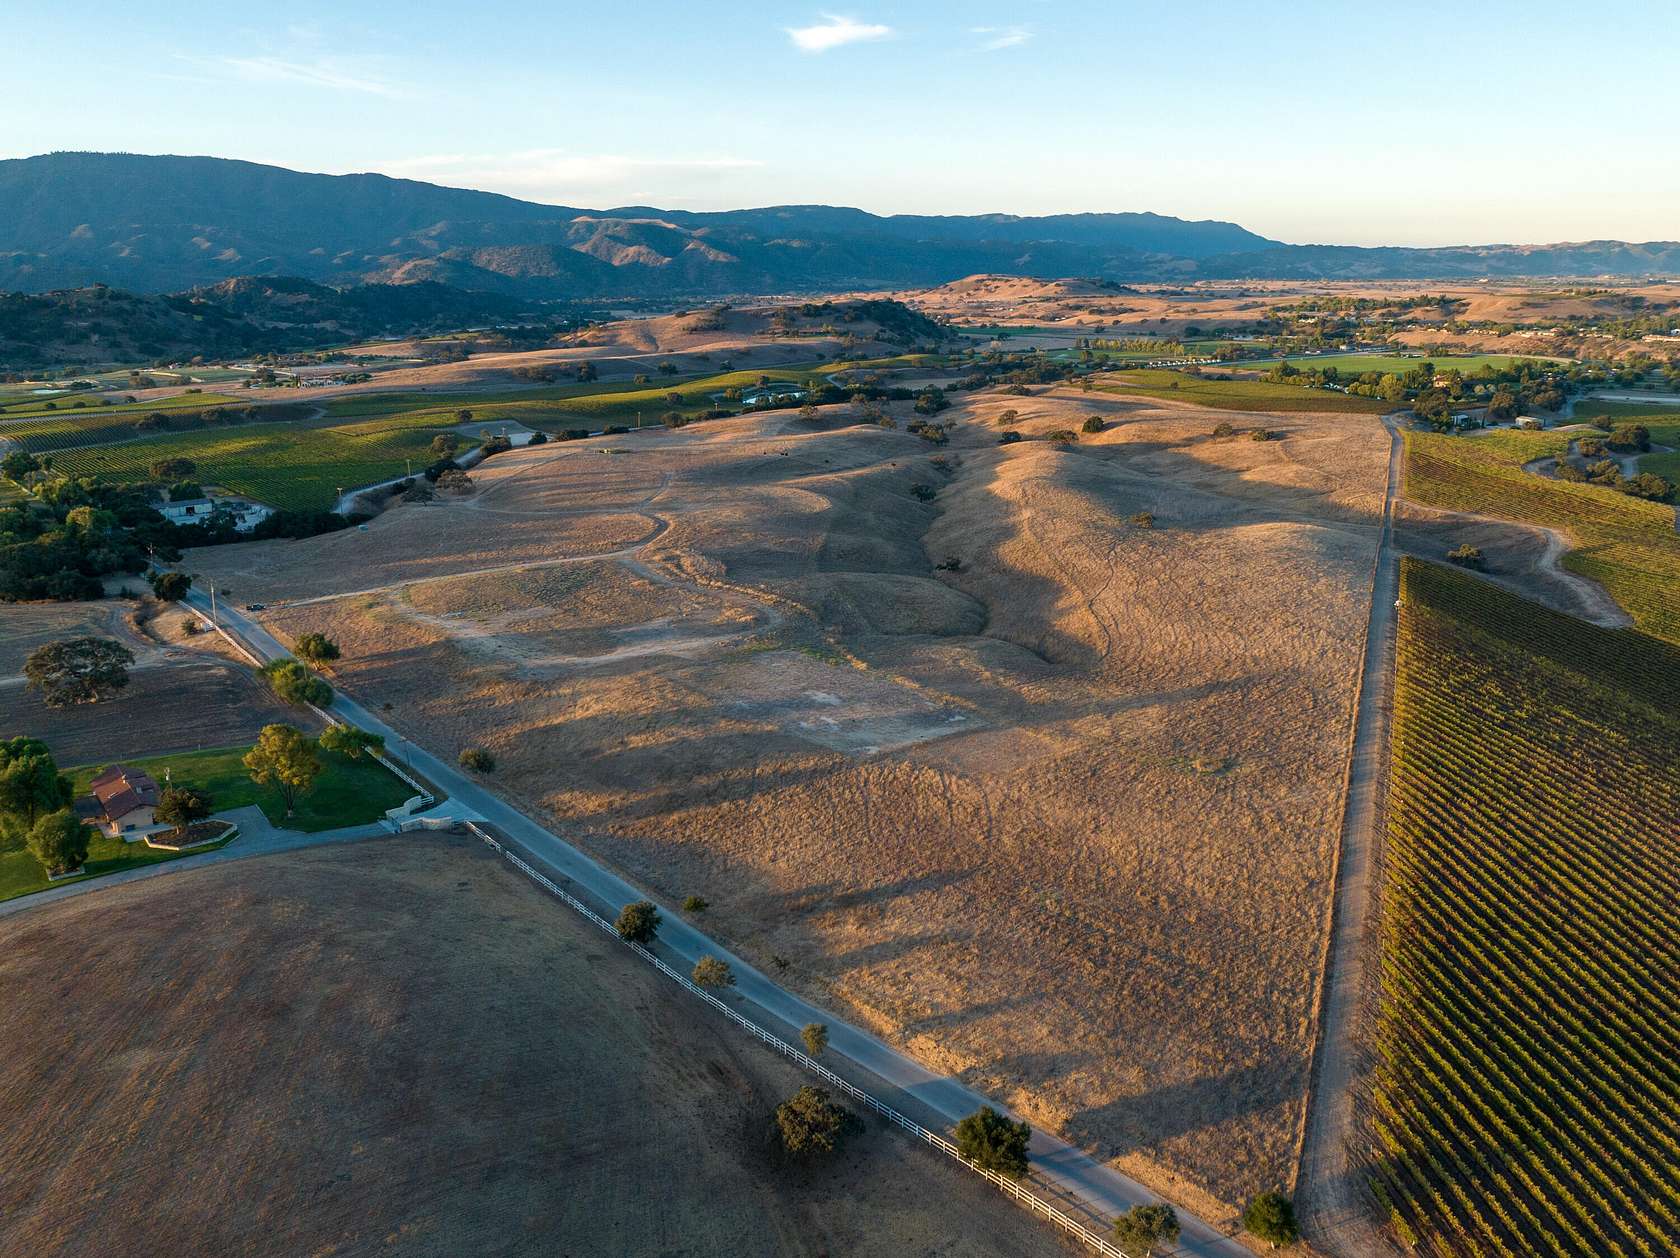 105 Acres of Agricultural Land for Sale in Santa Ynez, California